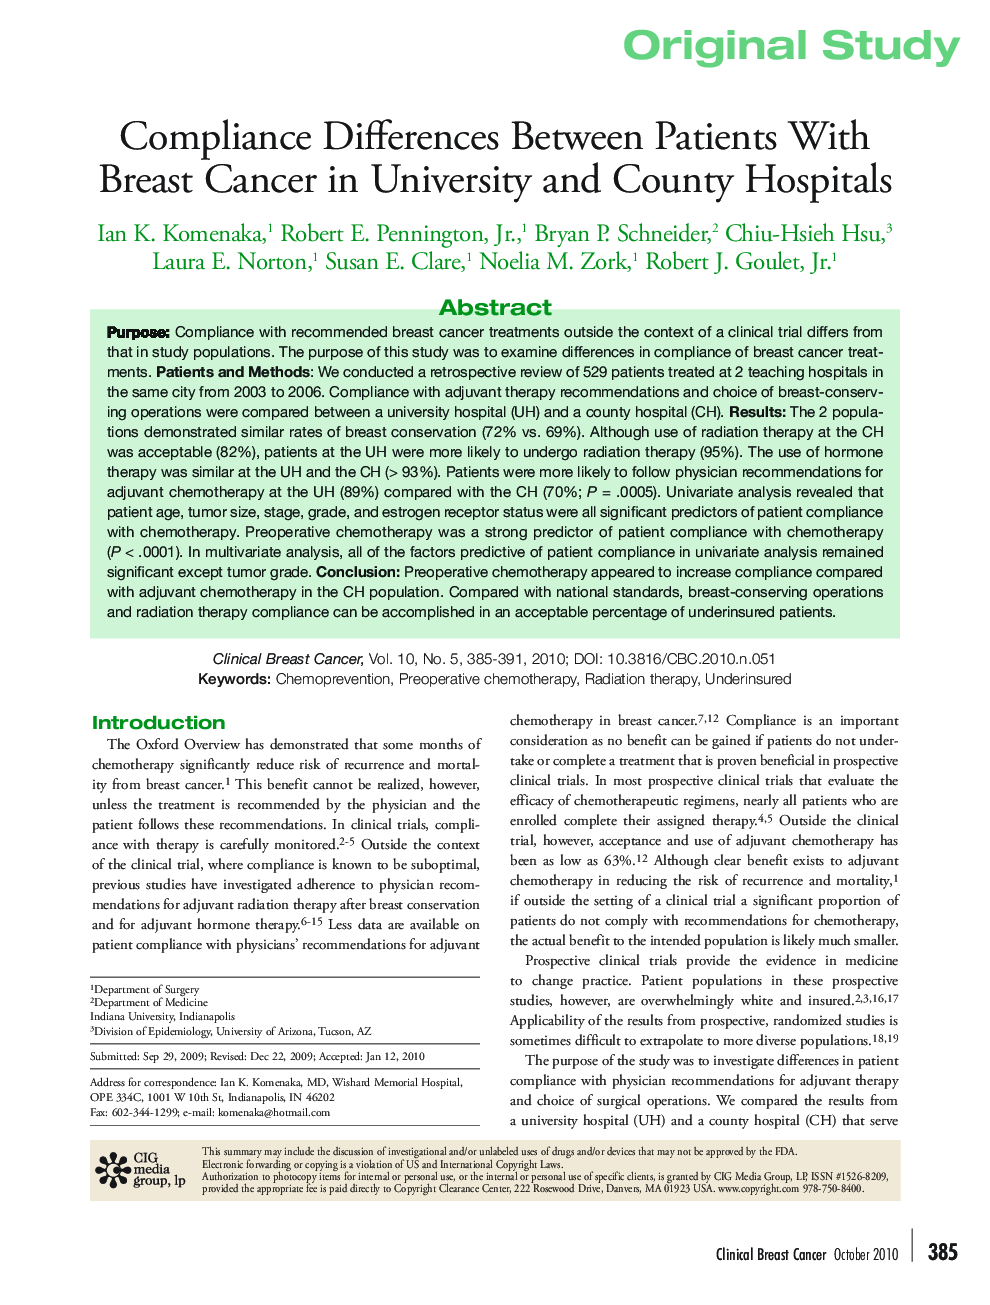 Compliance Differences Between Patients With Breast Cancer in University and County Hospitals